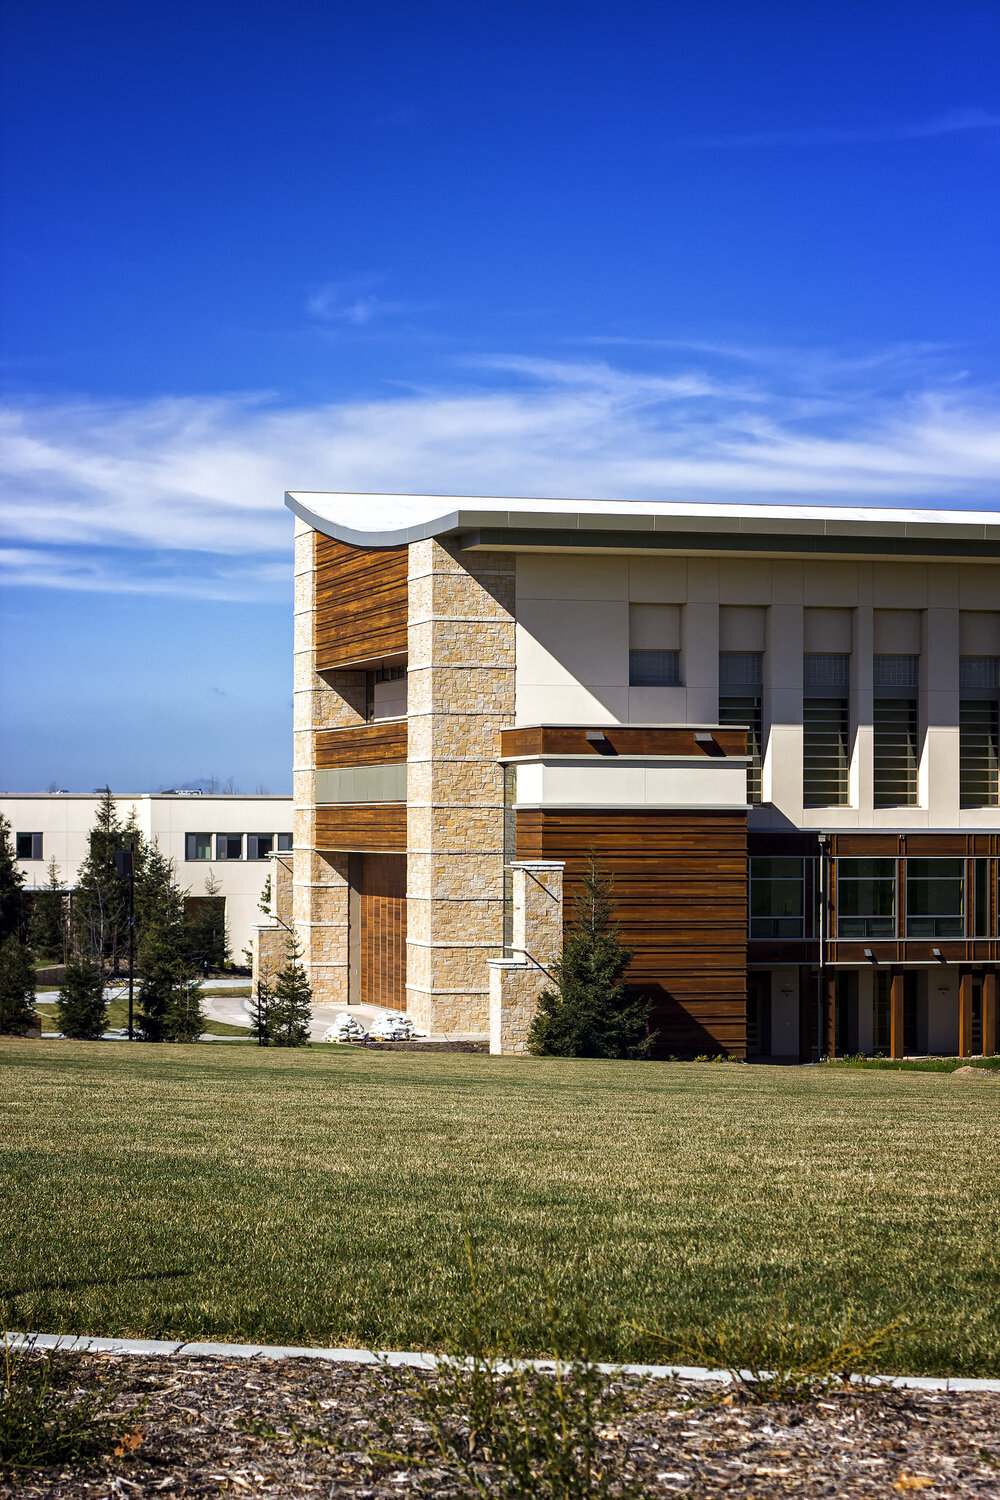 A view of the exterior of the Green Music Center on a sunny day with green grass in the foreground and blue skies in the background